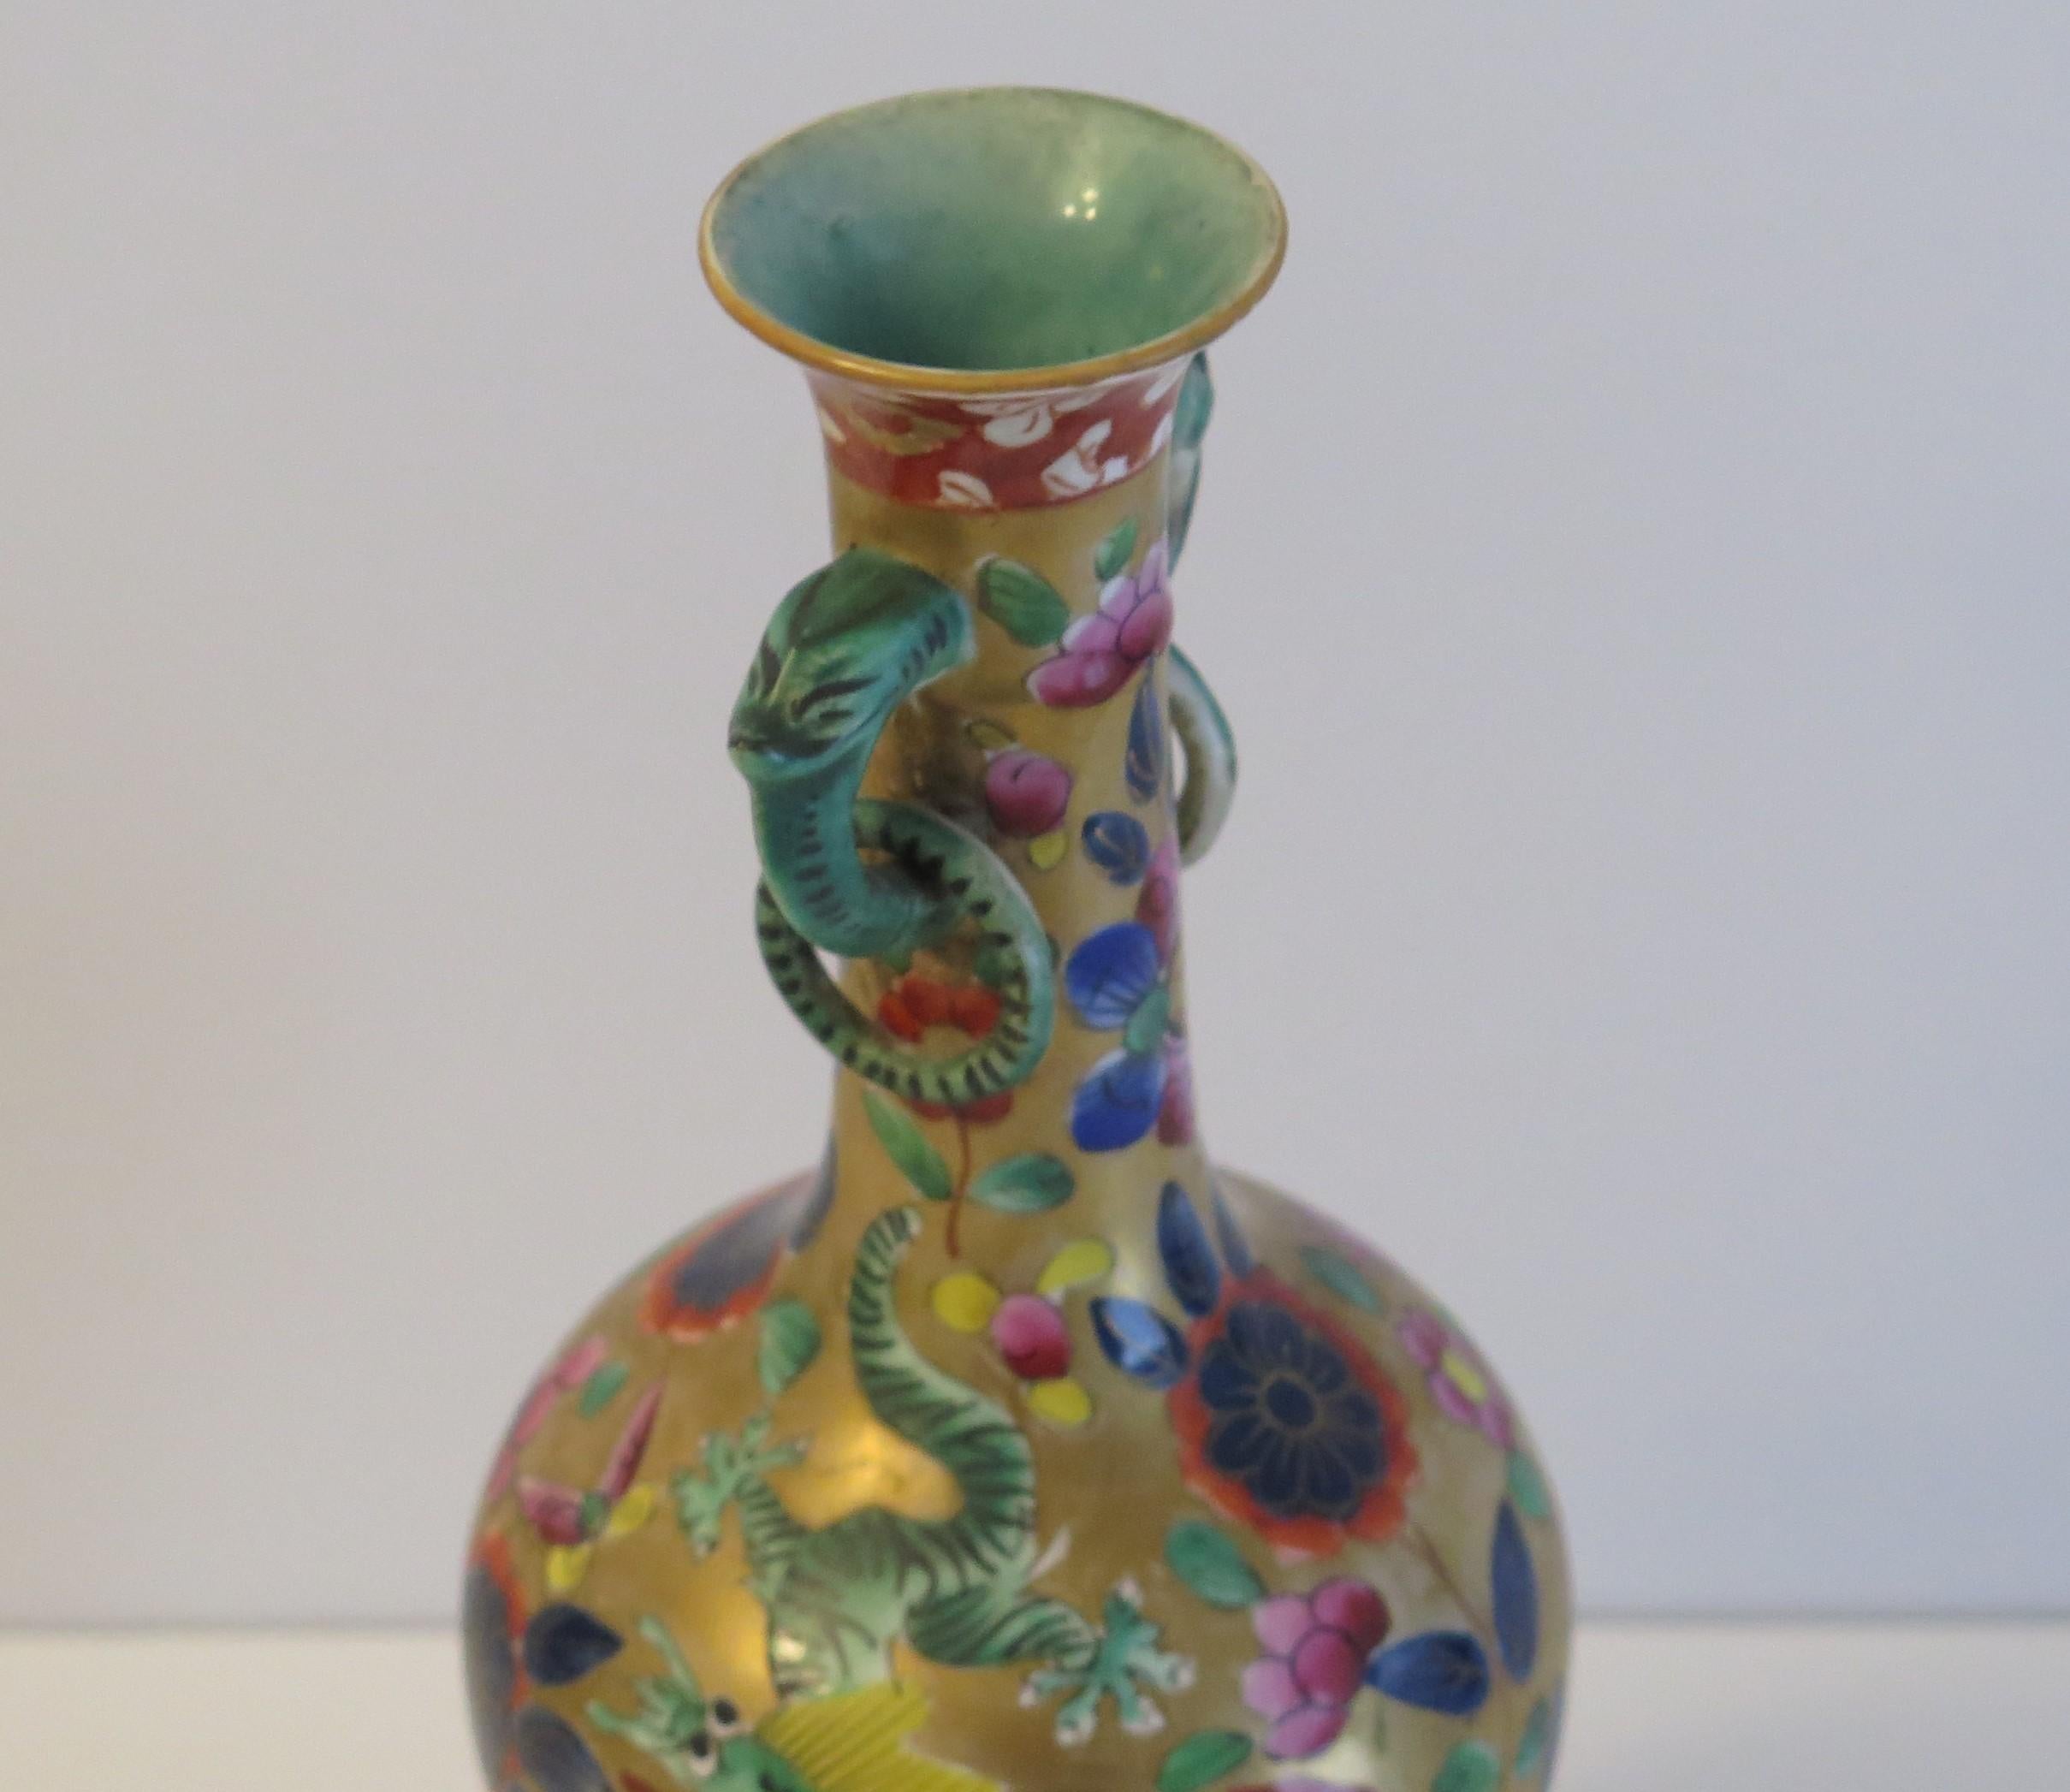 Very Rare Mason's Ironstone Bottle Vase in Chinese Dragon Pattern, circa 1820 For Sale 3